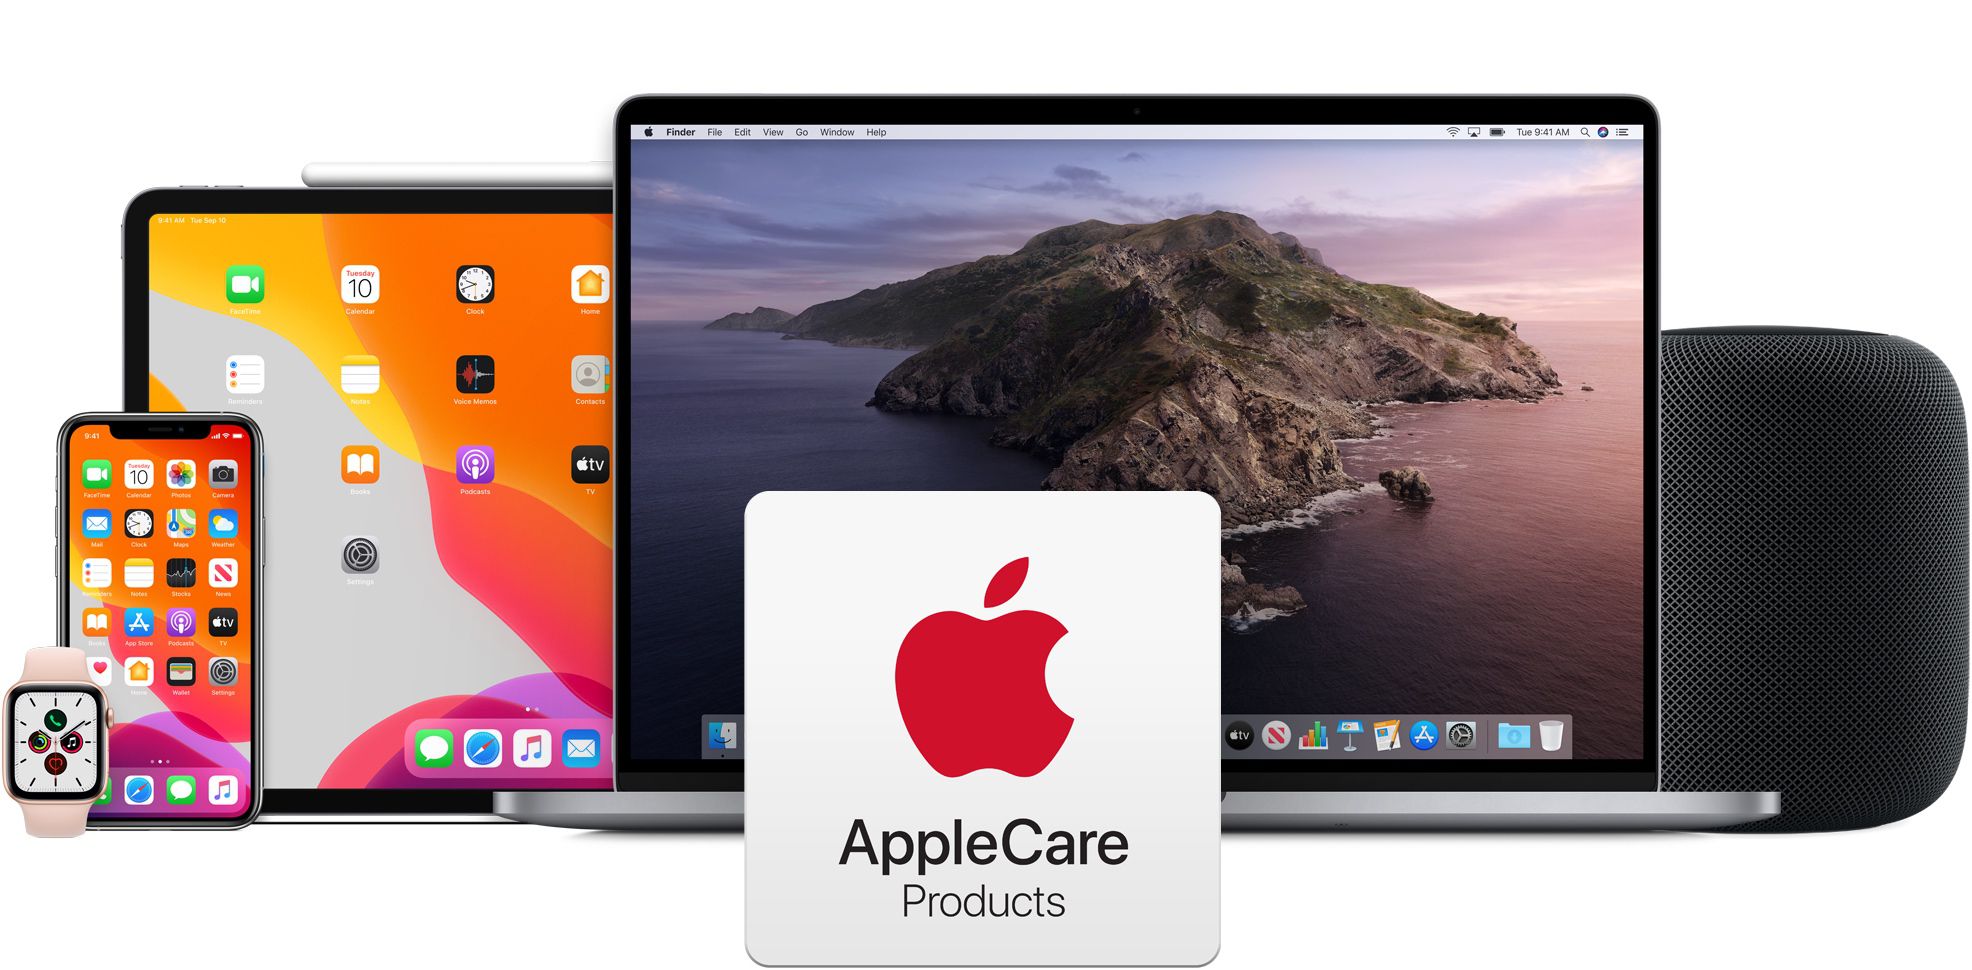 AppleCare Guide: Is it Worth Paying For? - MacRumors